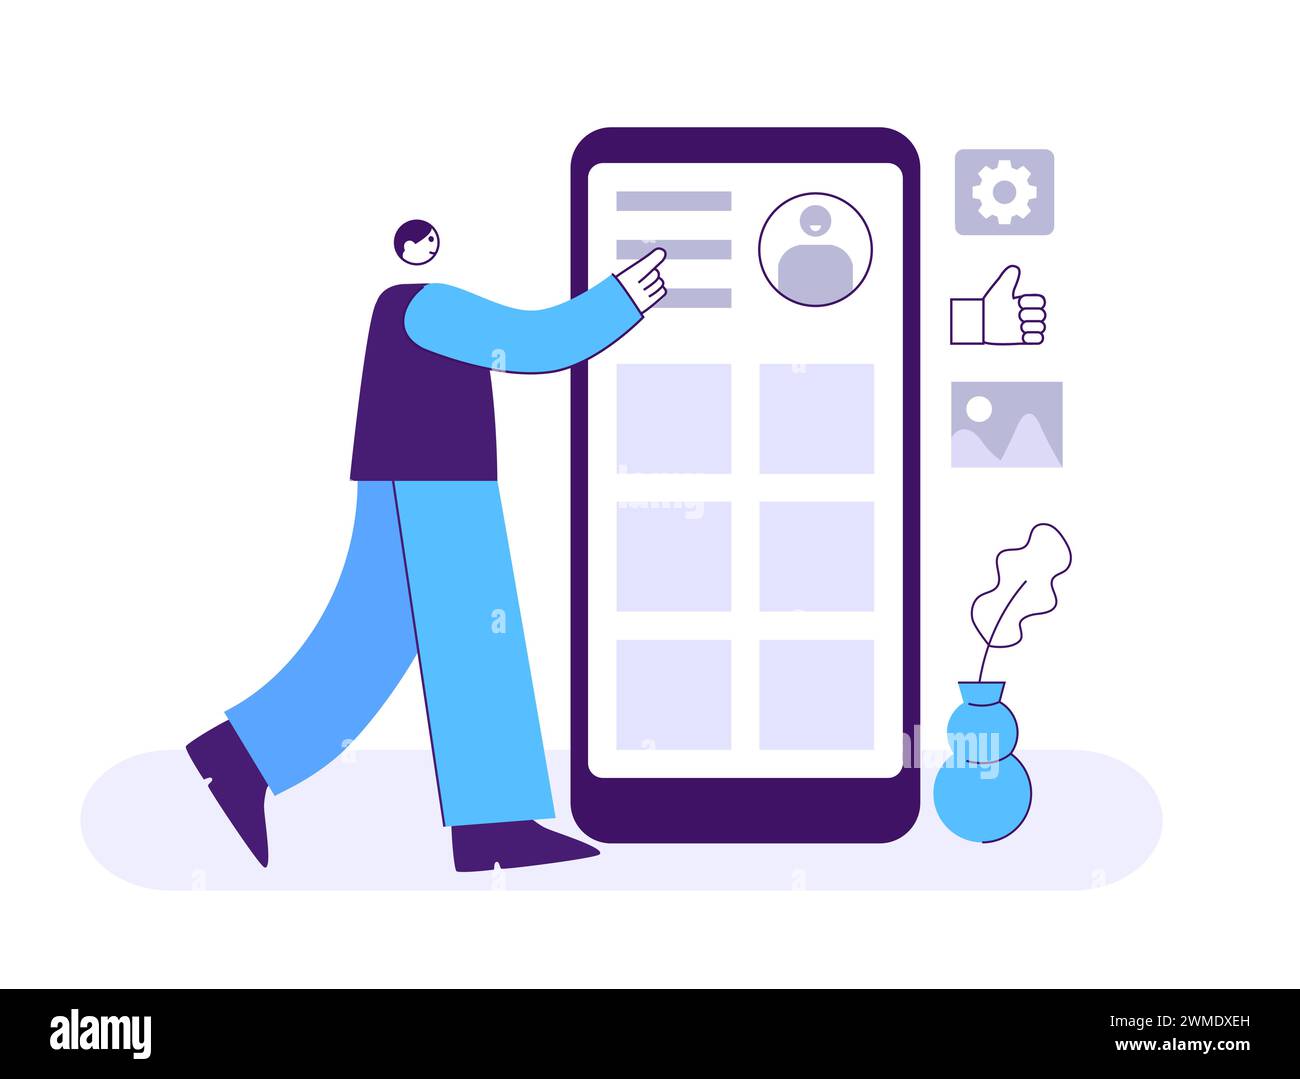 SMM manager concept. Man working in social media to promote account attracting new followers. Network marketing Stock Vector